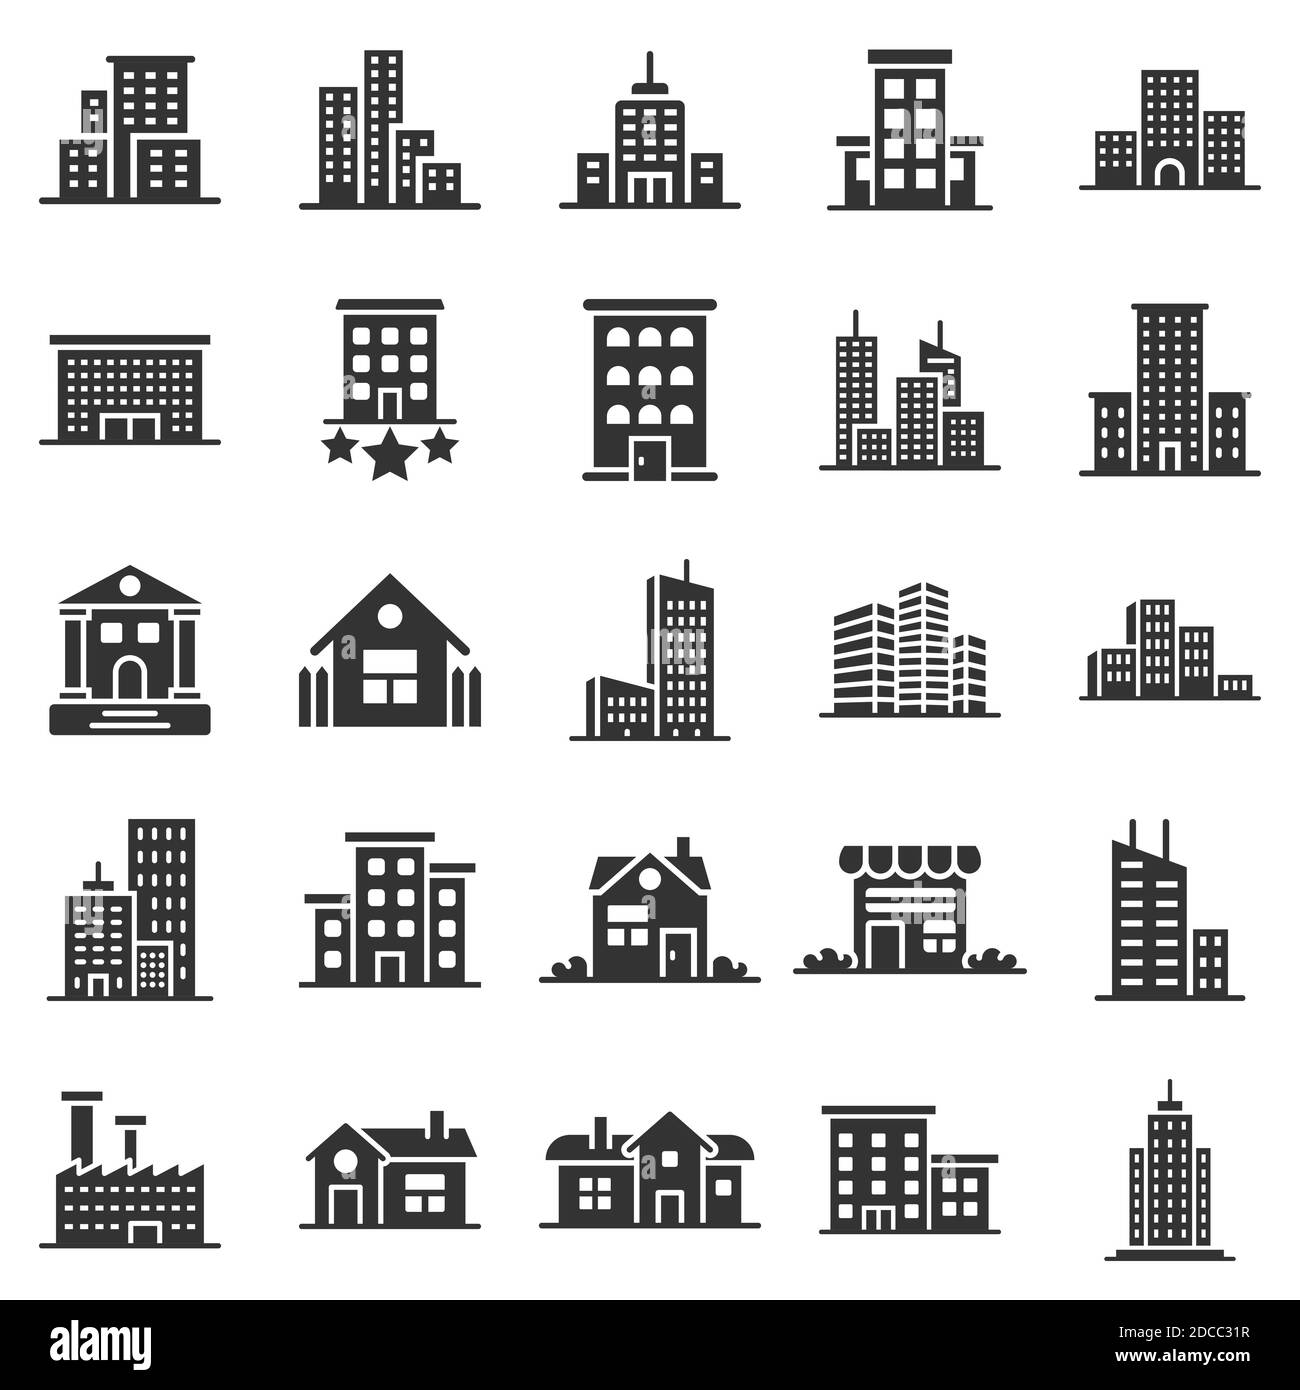 Building icon set in flat style. Town skyscraper apartment vector illustration on white isolated background. City tower business concept. Stock Vector